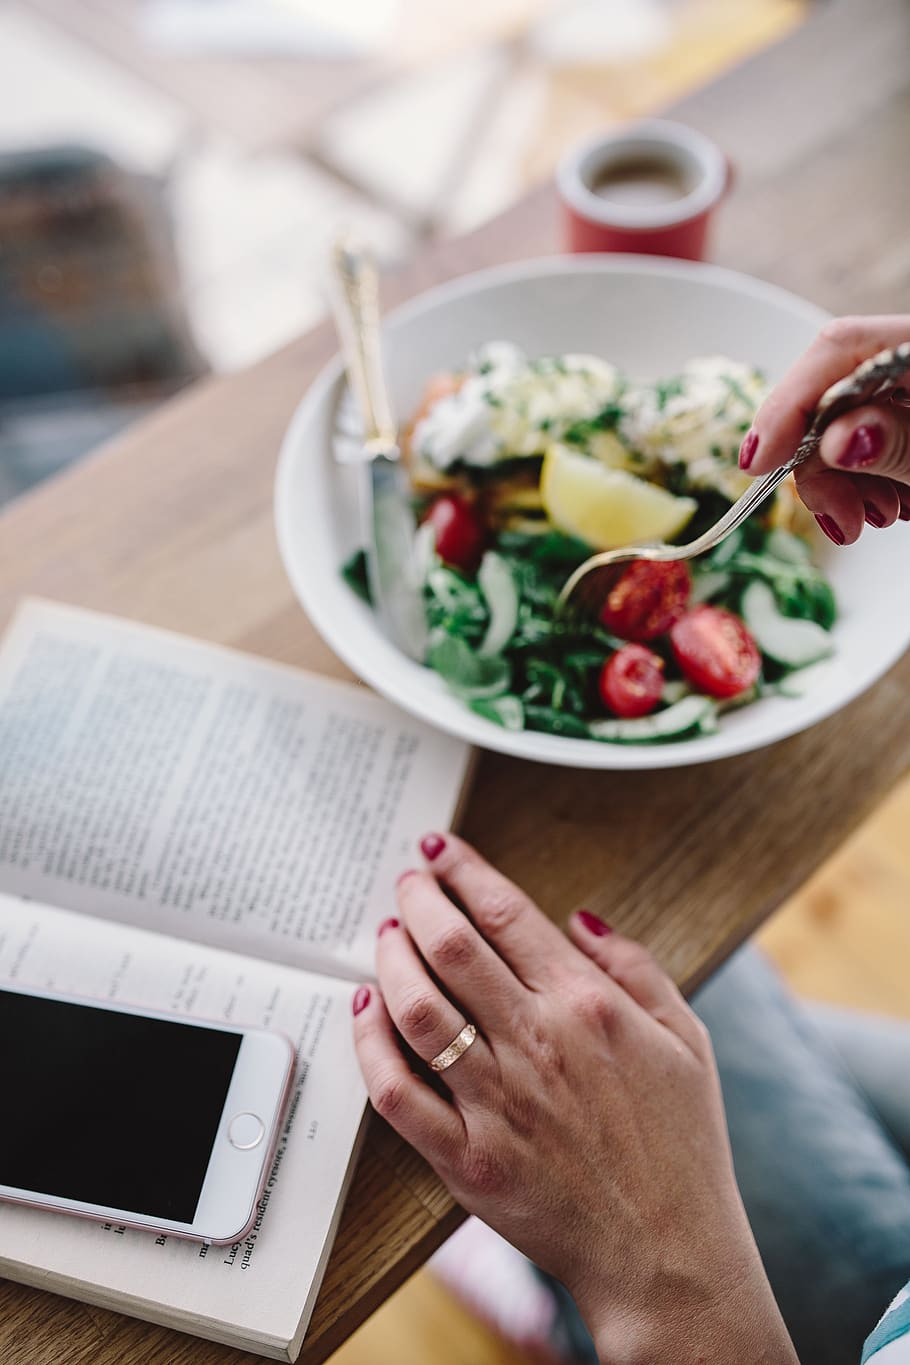 female, book, reading, breakfast, healthy, meal, salad, Woman, eating, human hand